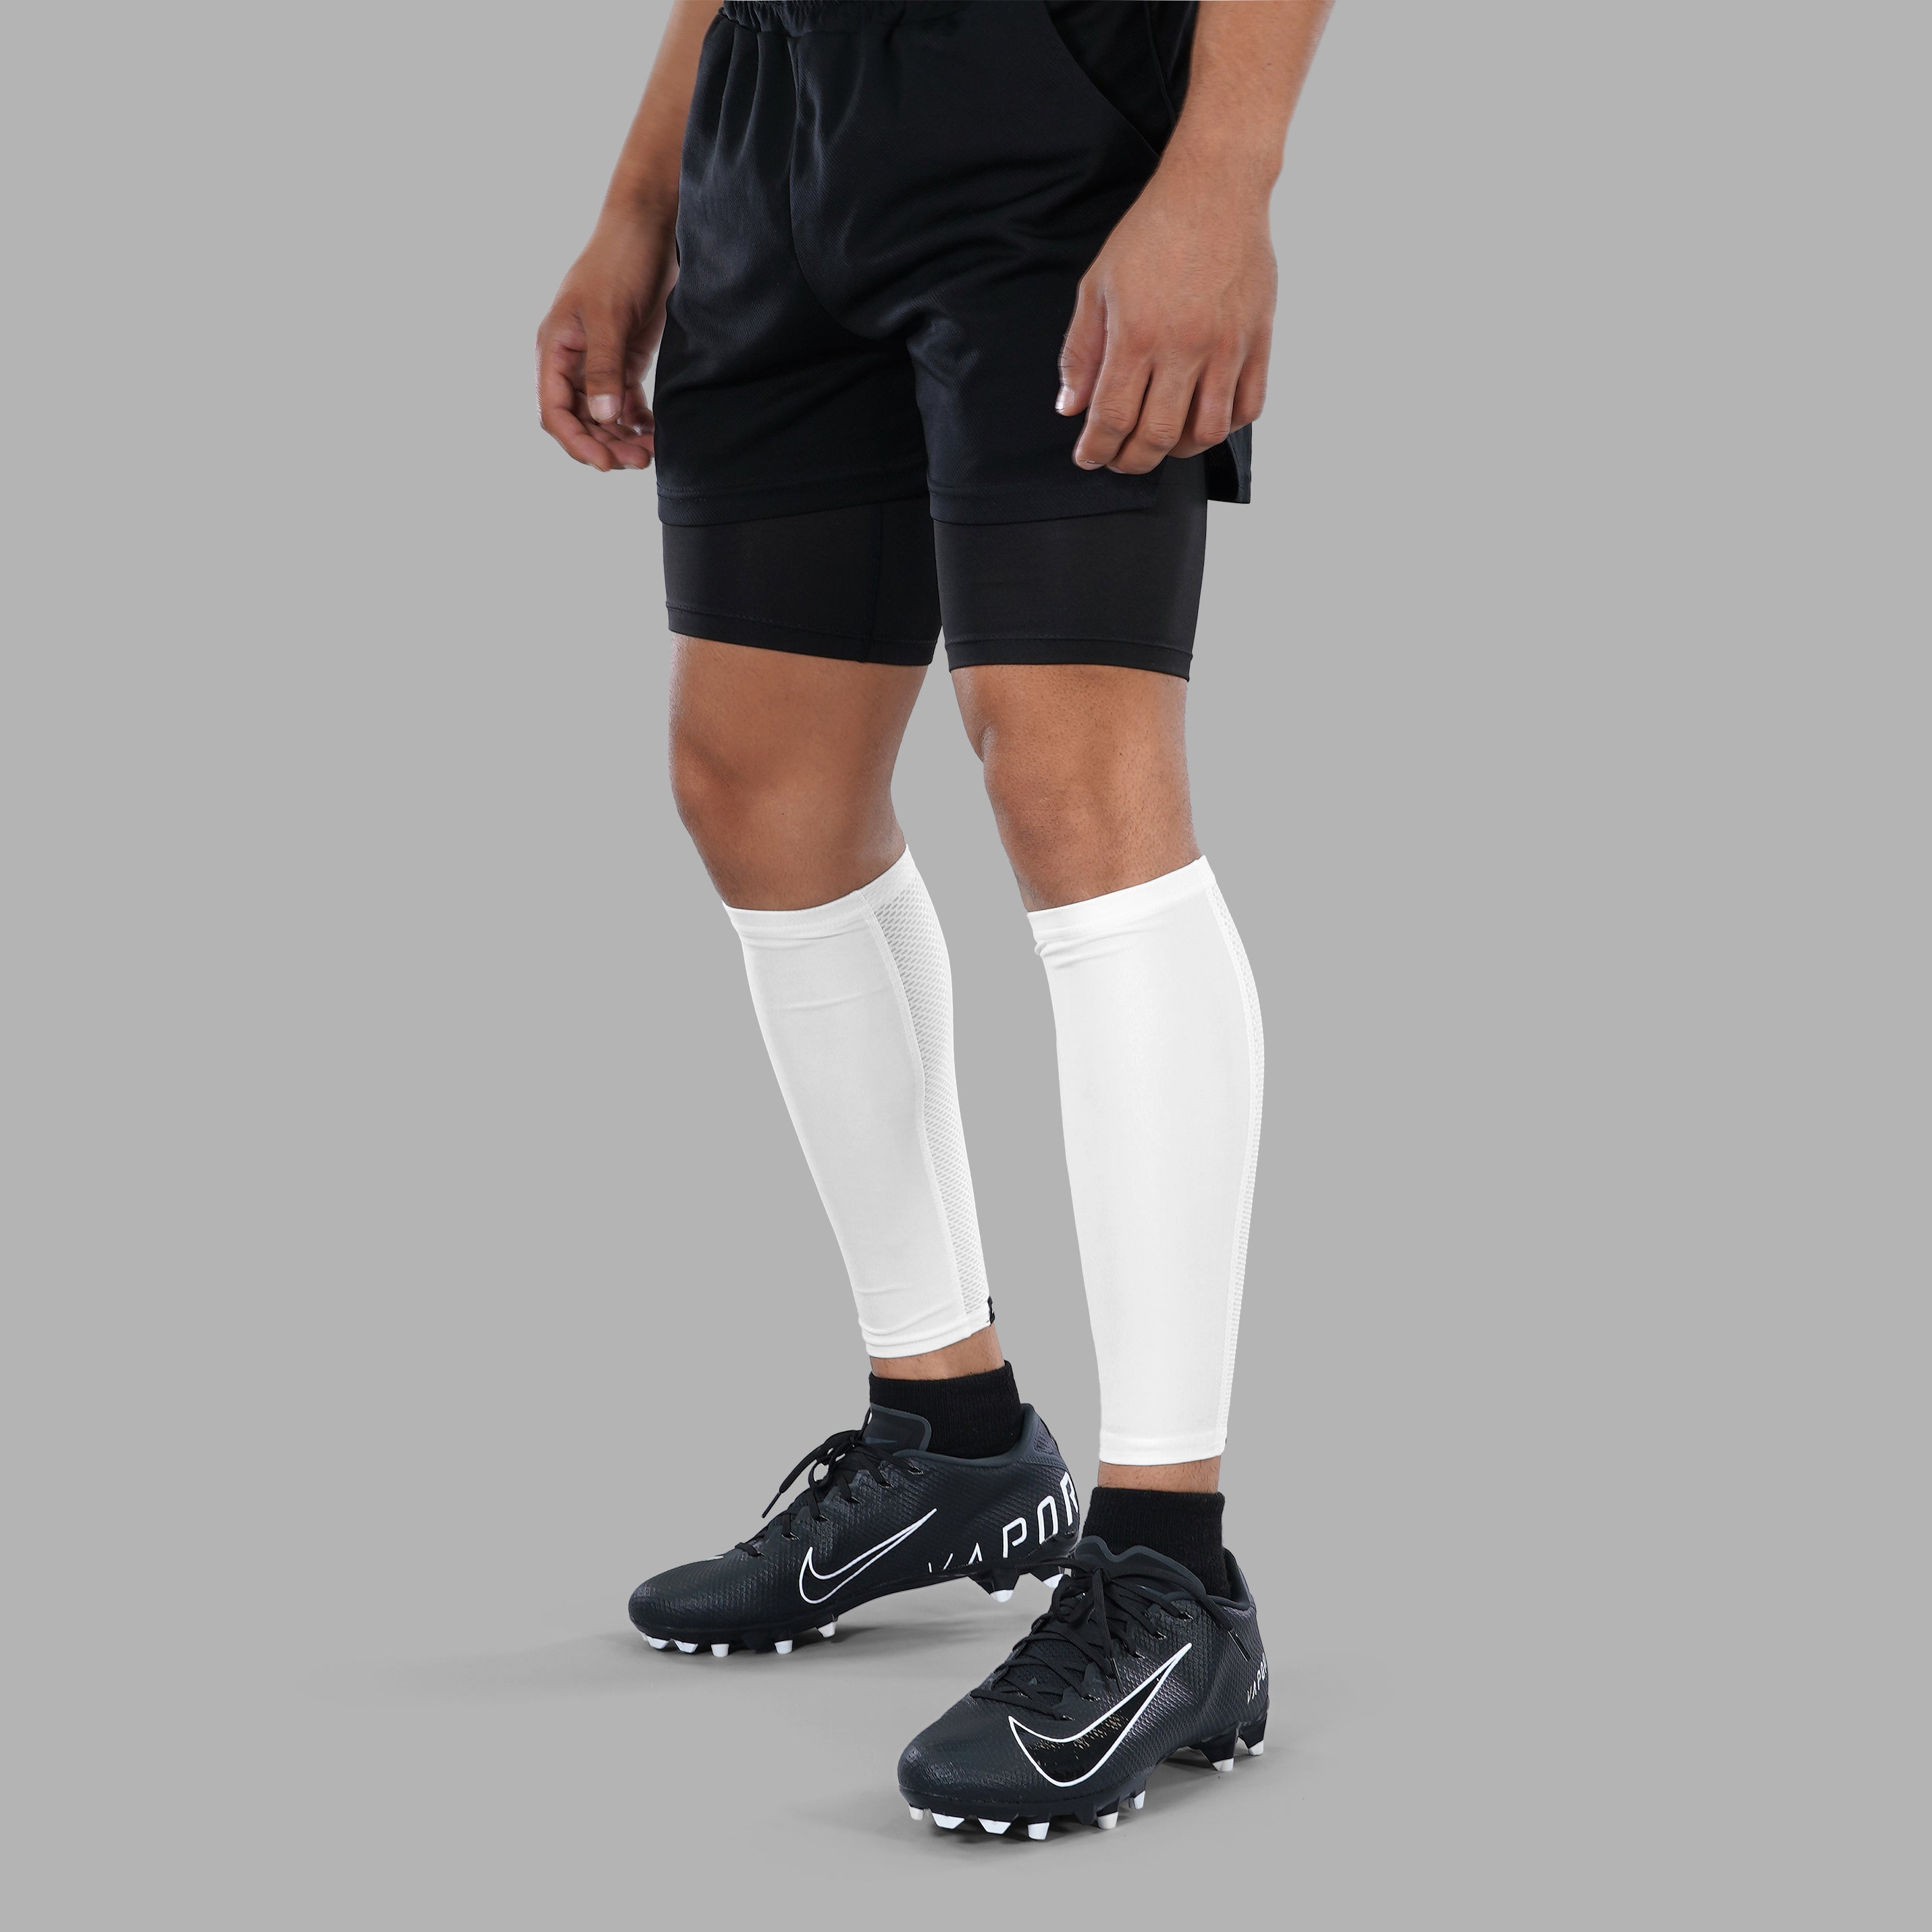 ESS Calf Compression Sleeve - White - Just Volleyball Ltd